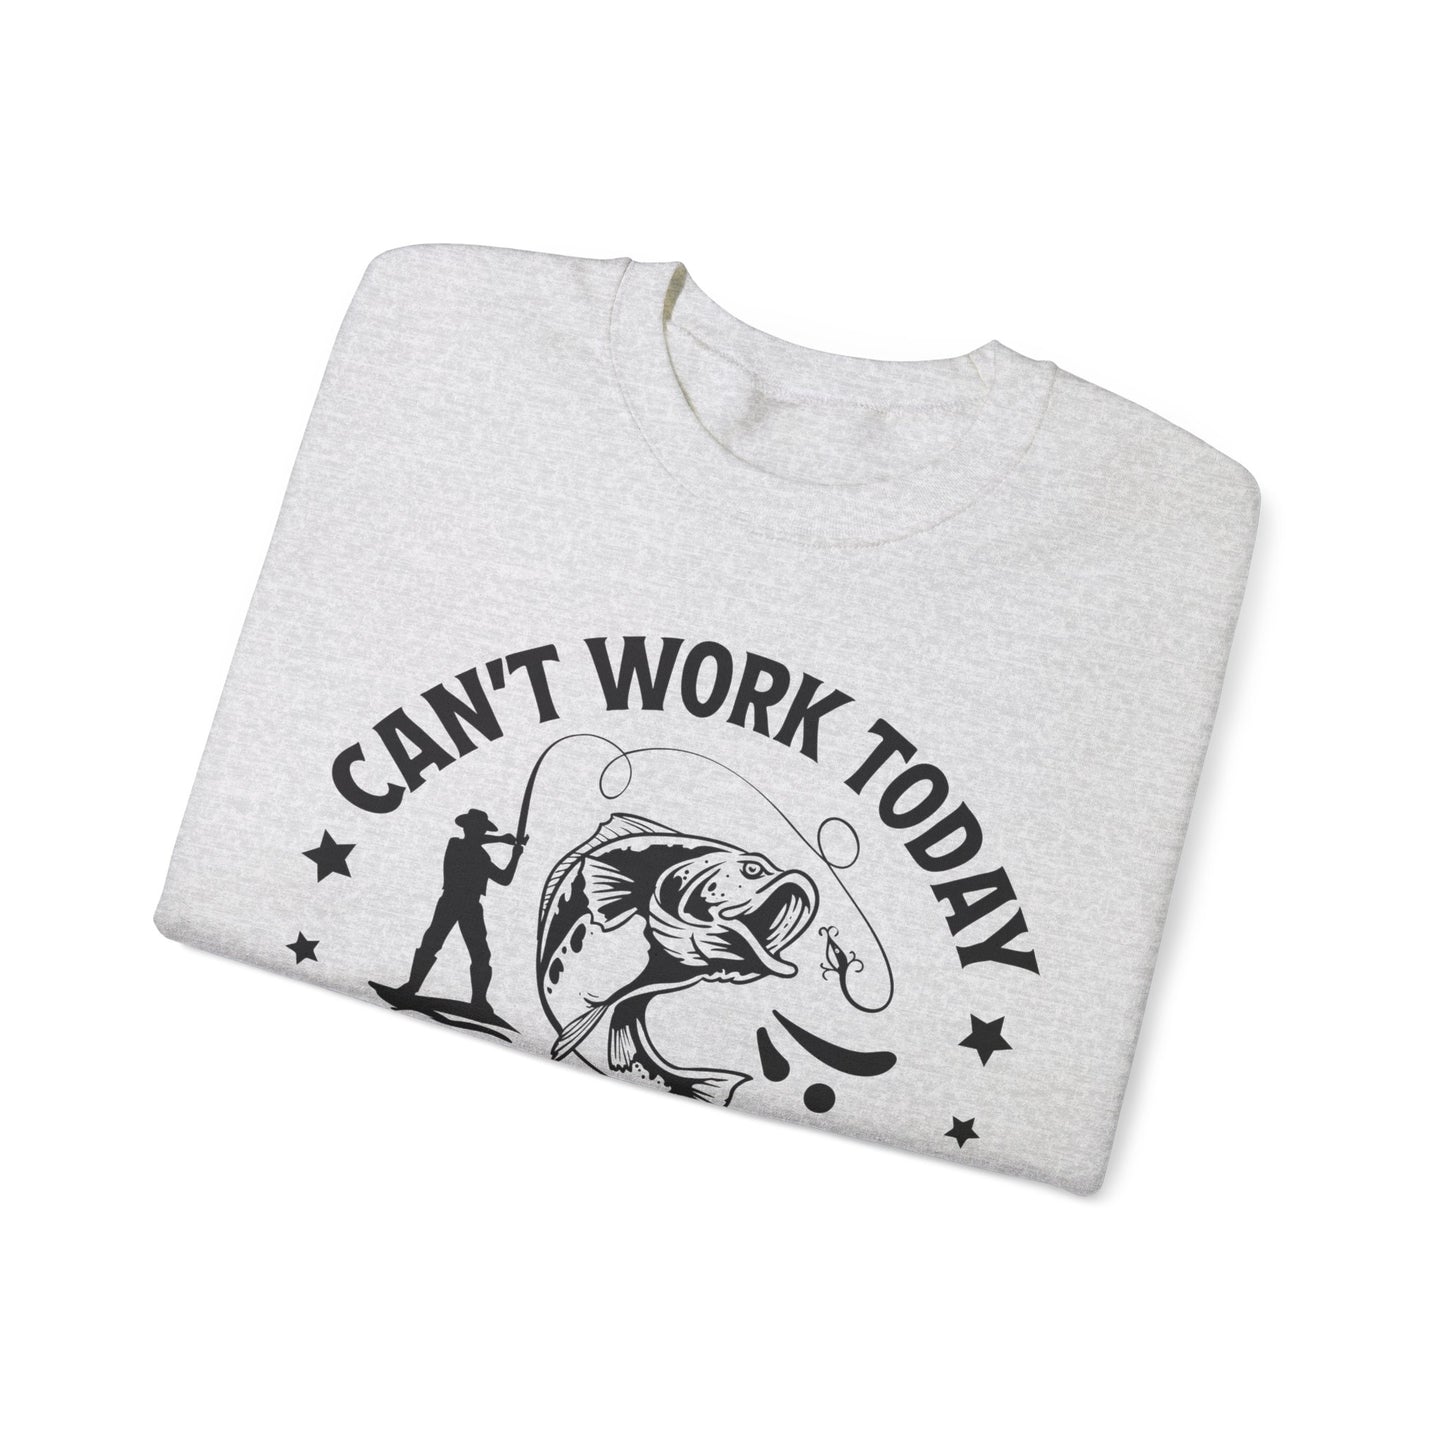 Can't work today, my arm is in a cast - Unisex Heavy Blend™ Crewneck Sweatshirt